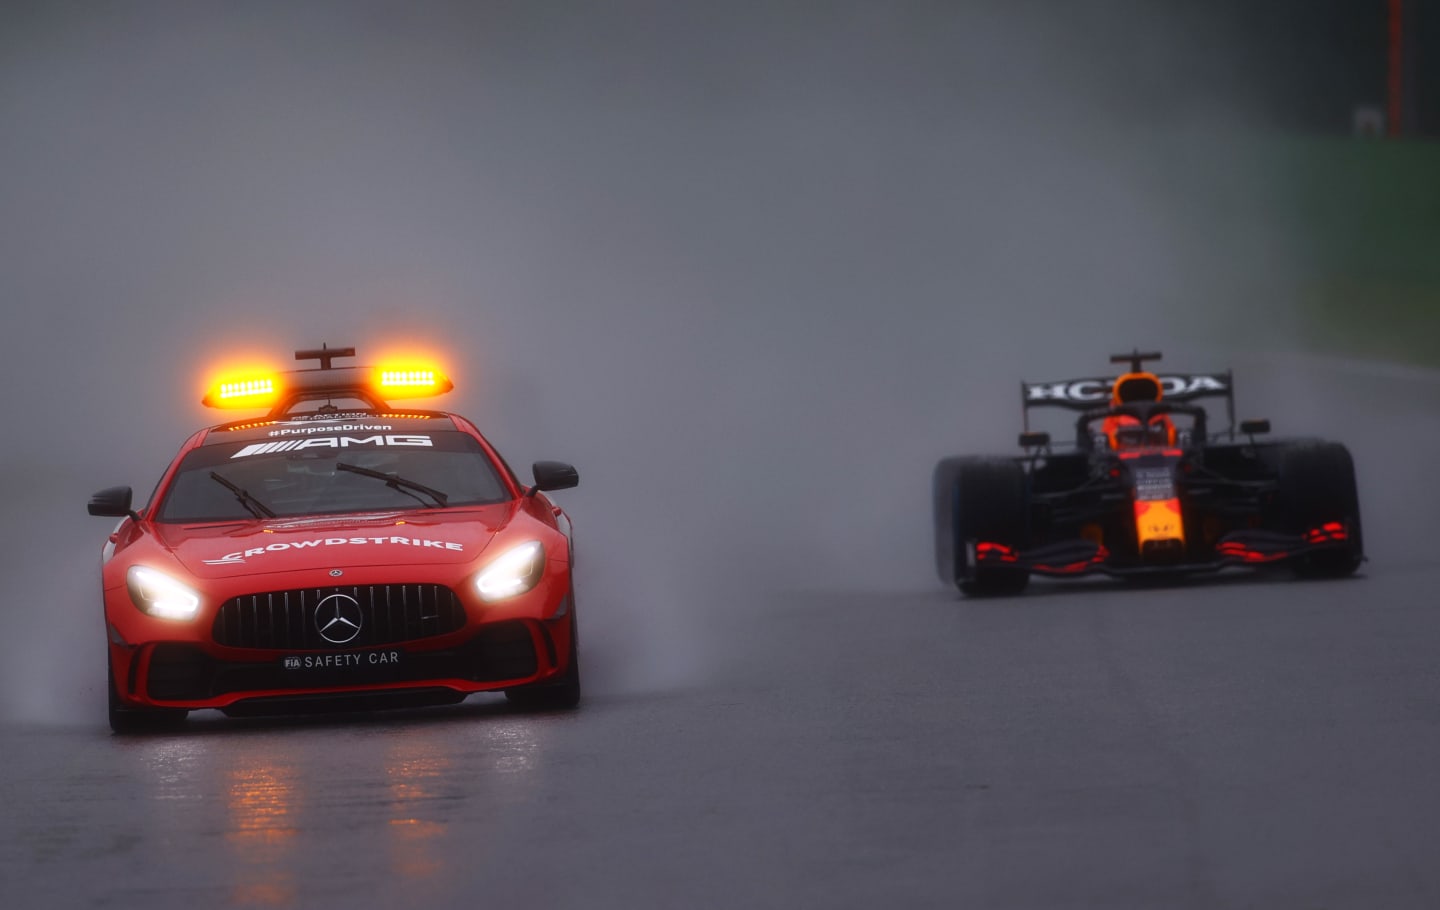 SPA, BELGIUM - AUGUST 29: The FIA Safety Car leads the field at the restart during the F1 Grand Prix of Belgium at Circuit de Spa-Francorchamps on August 29, 2021 in Spa, Belgium. (Photo by Dan Istitene - Formula 1/Formula 1 via Getty Images)